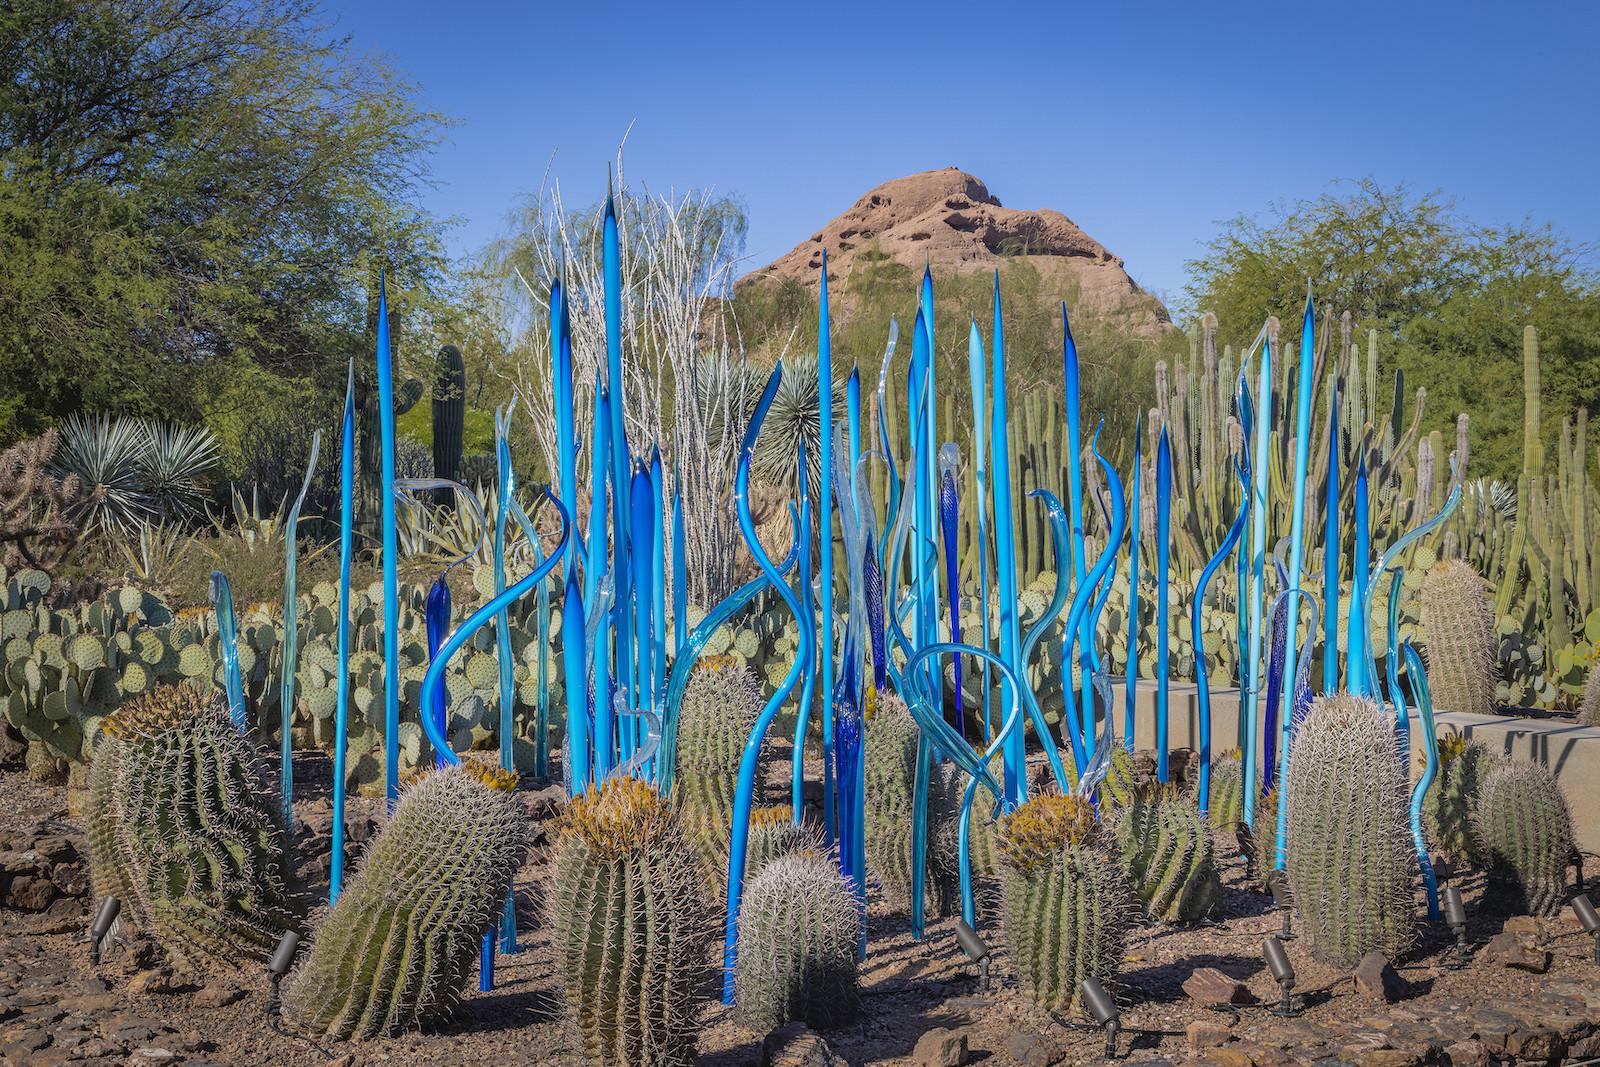 Dale Chihuly, Blue Birch Reeds and Scorpion Tails, 2021, 9 x 16 x 14½', Desert Botanical Garden, Phoenix, Photo by Nathaniel Willson.